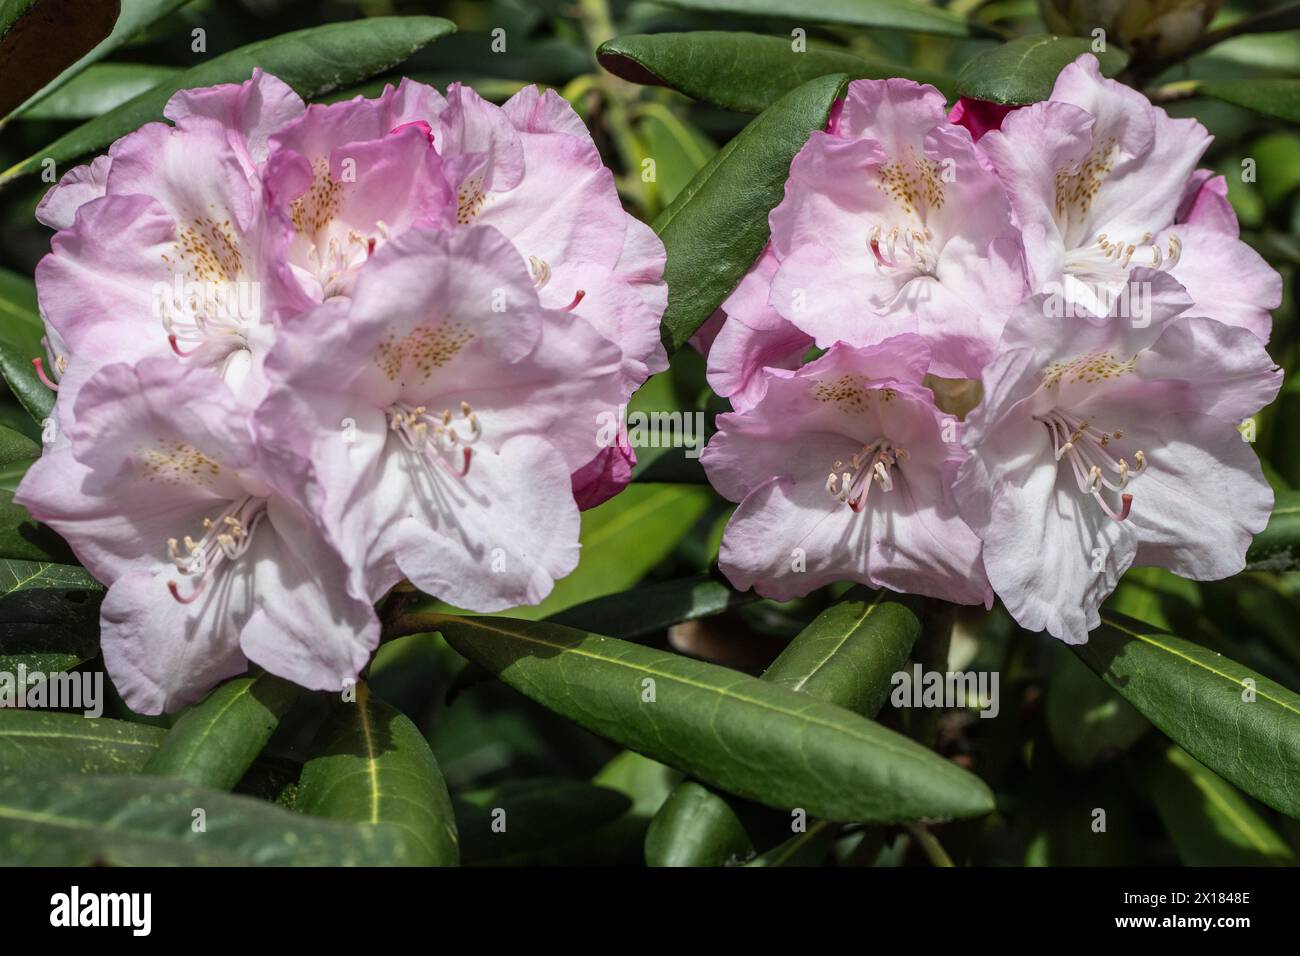 Rhododendron blossoms (Rhododendron Ken Janeck), Emsland, Lower Saxony, Germany Stock Photo